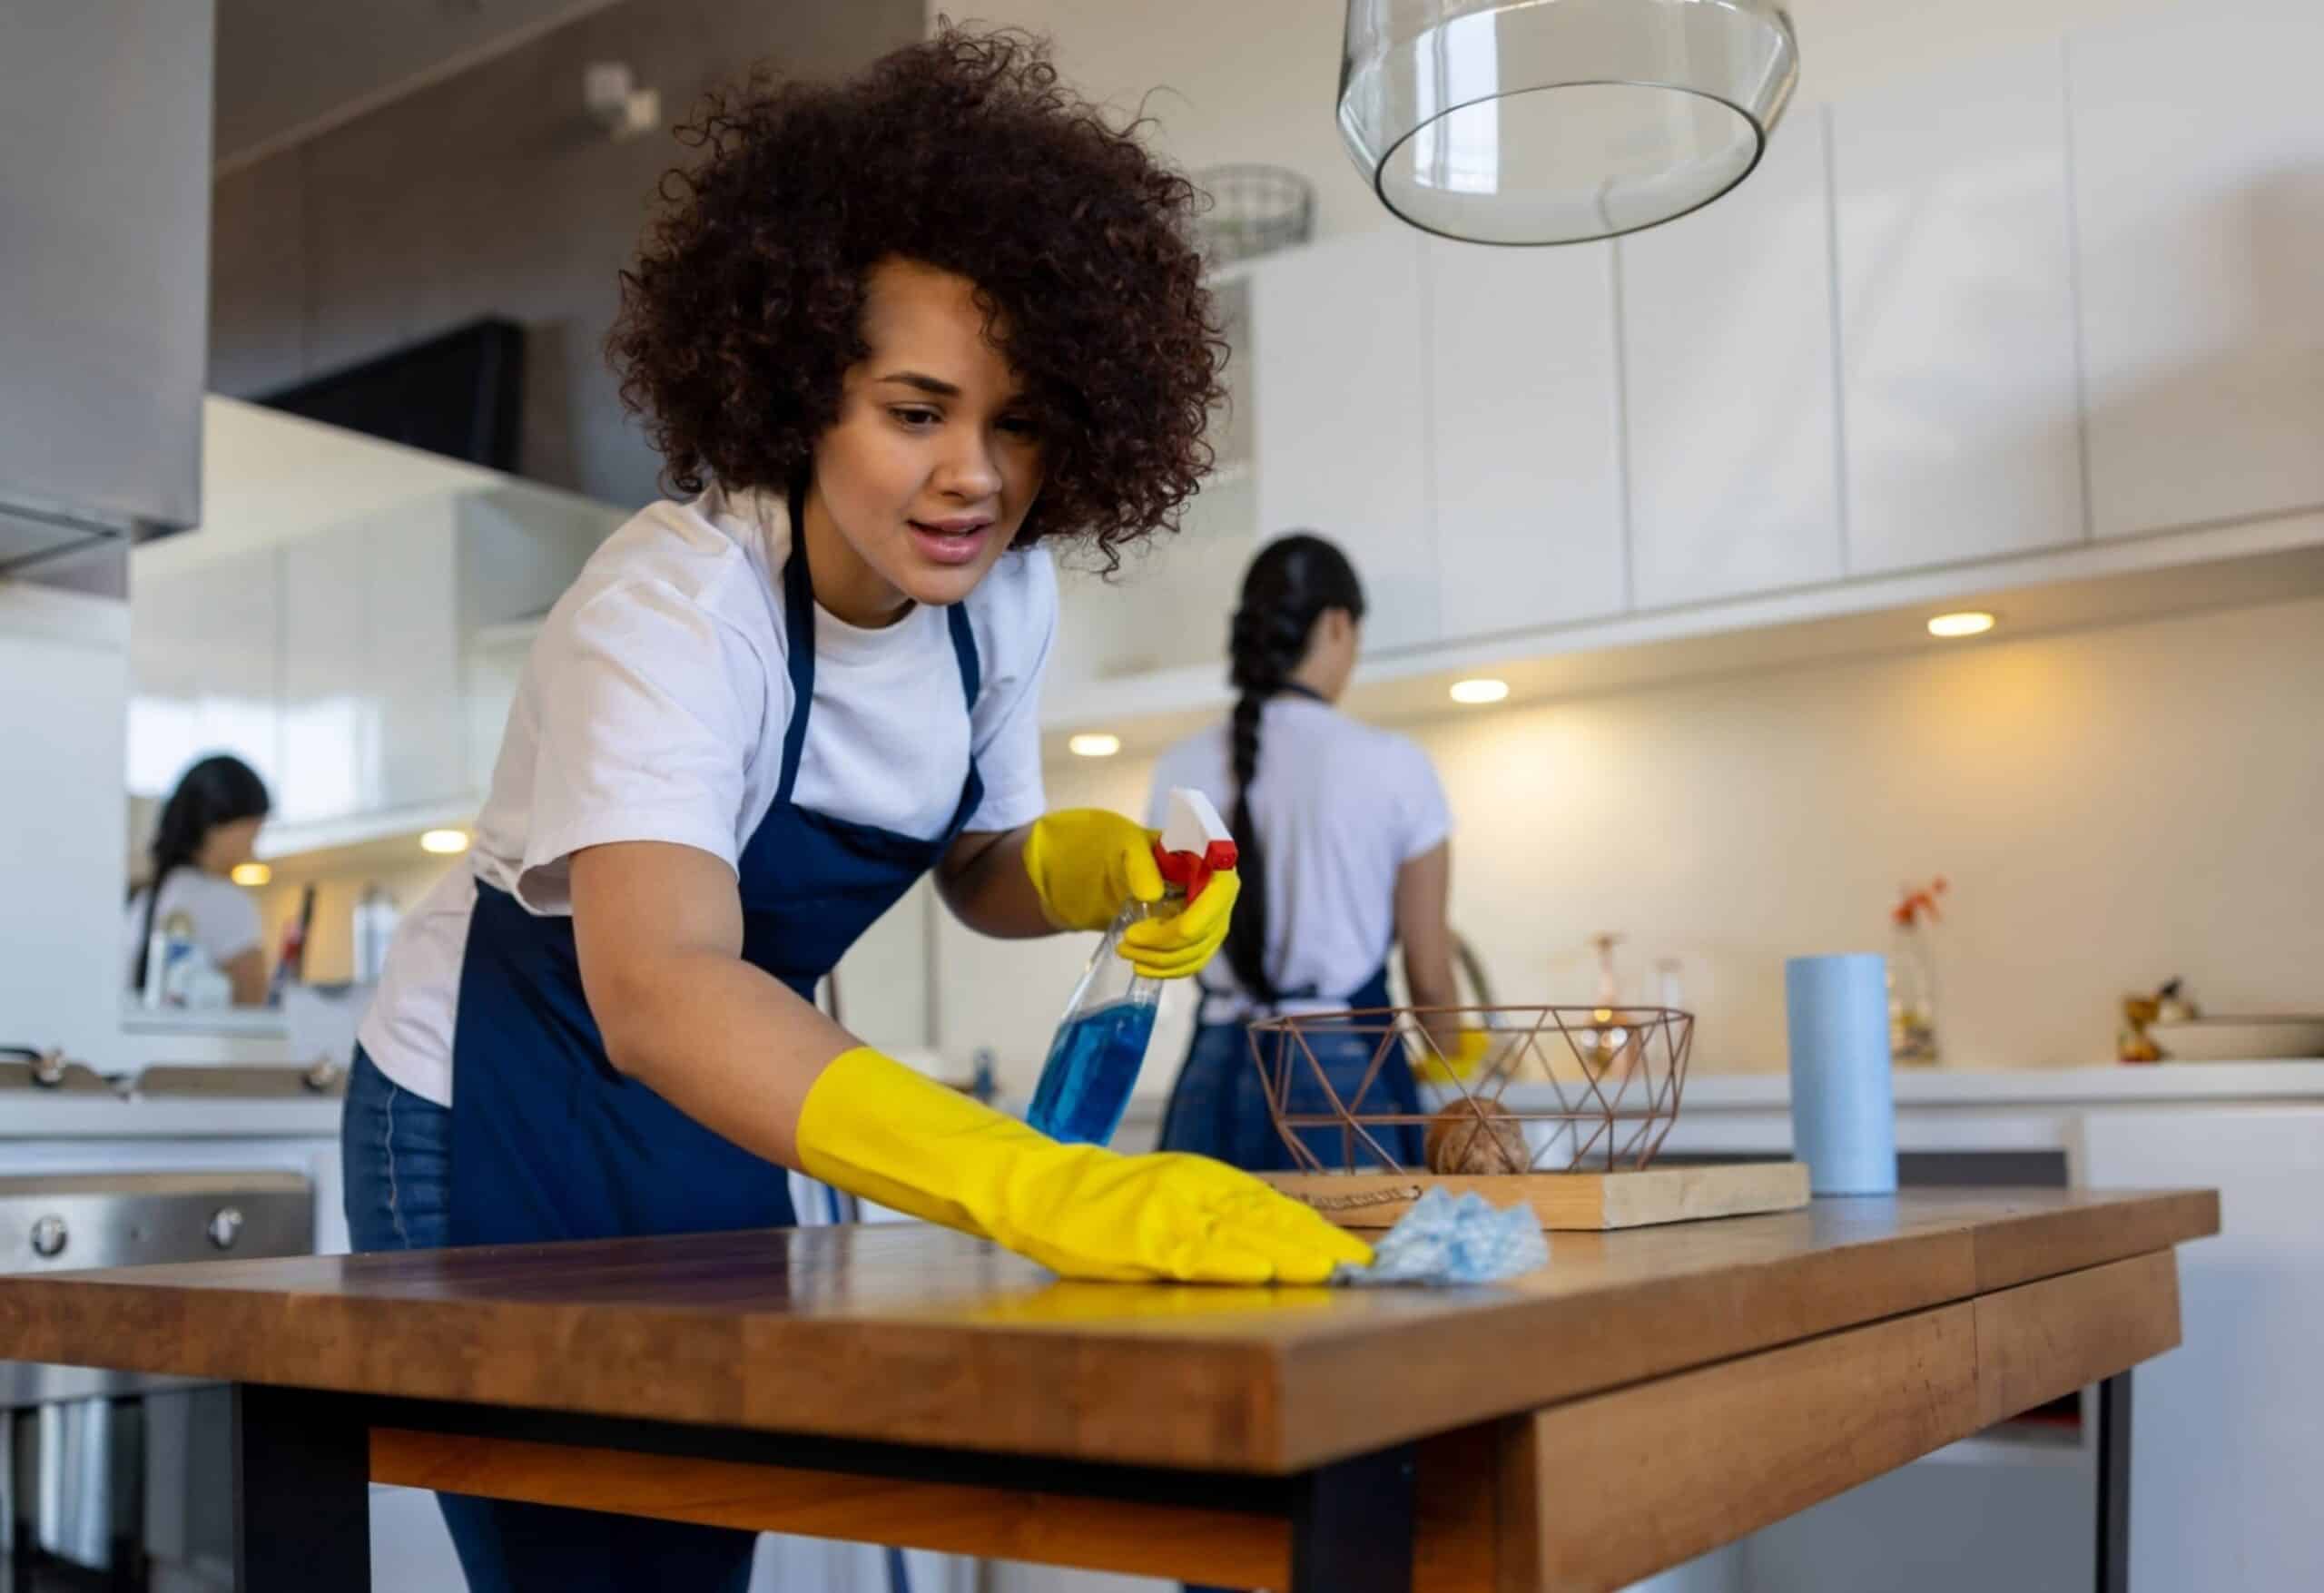 Ask the Pros Are You Supposed to Tip Your House Cleaners Tidyhere Image of Professional Cleaner Cleaning a Table At a House